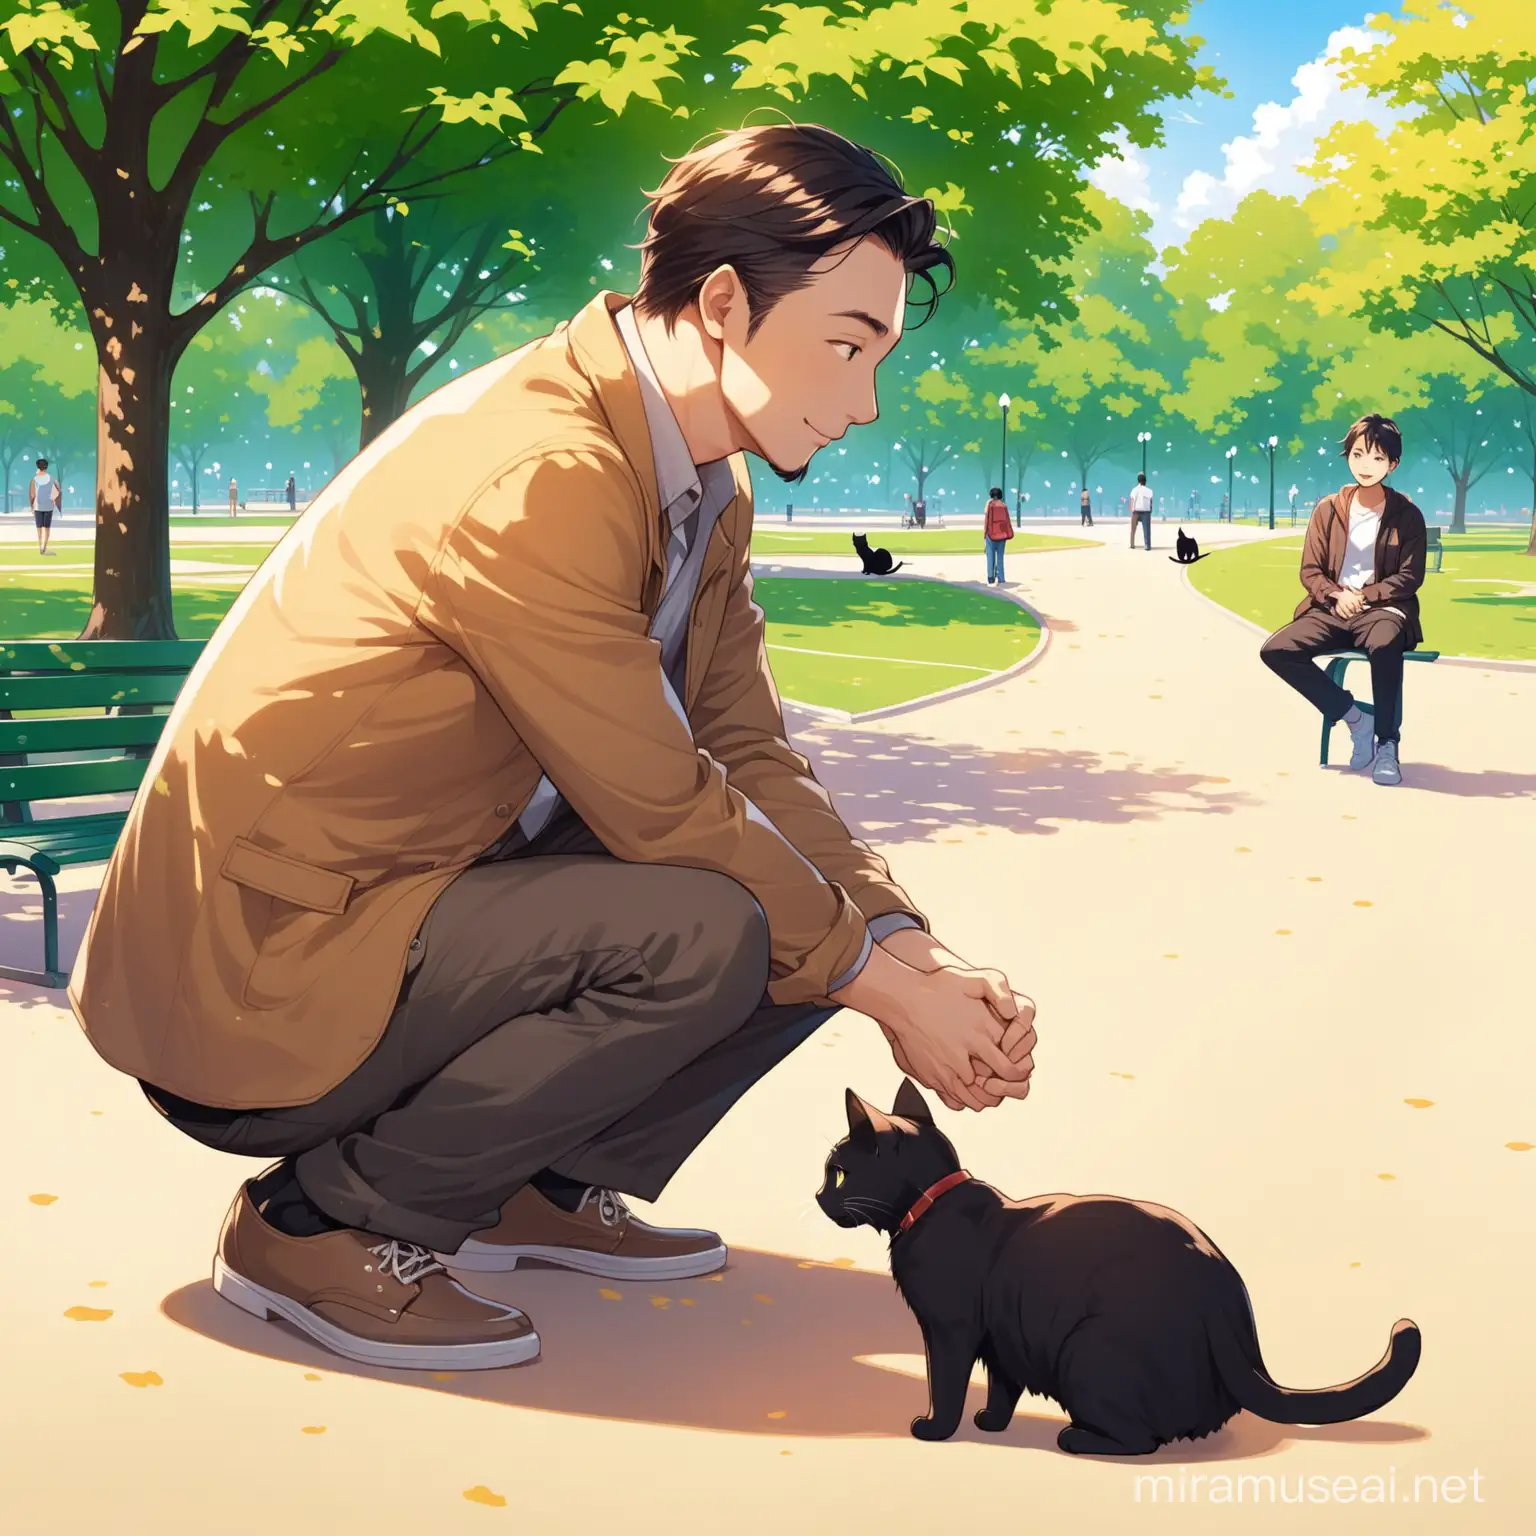 One fine day a man meets a cat at the park